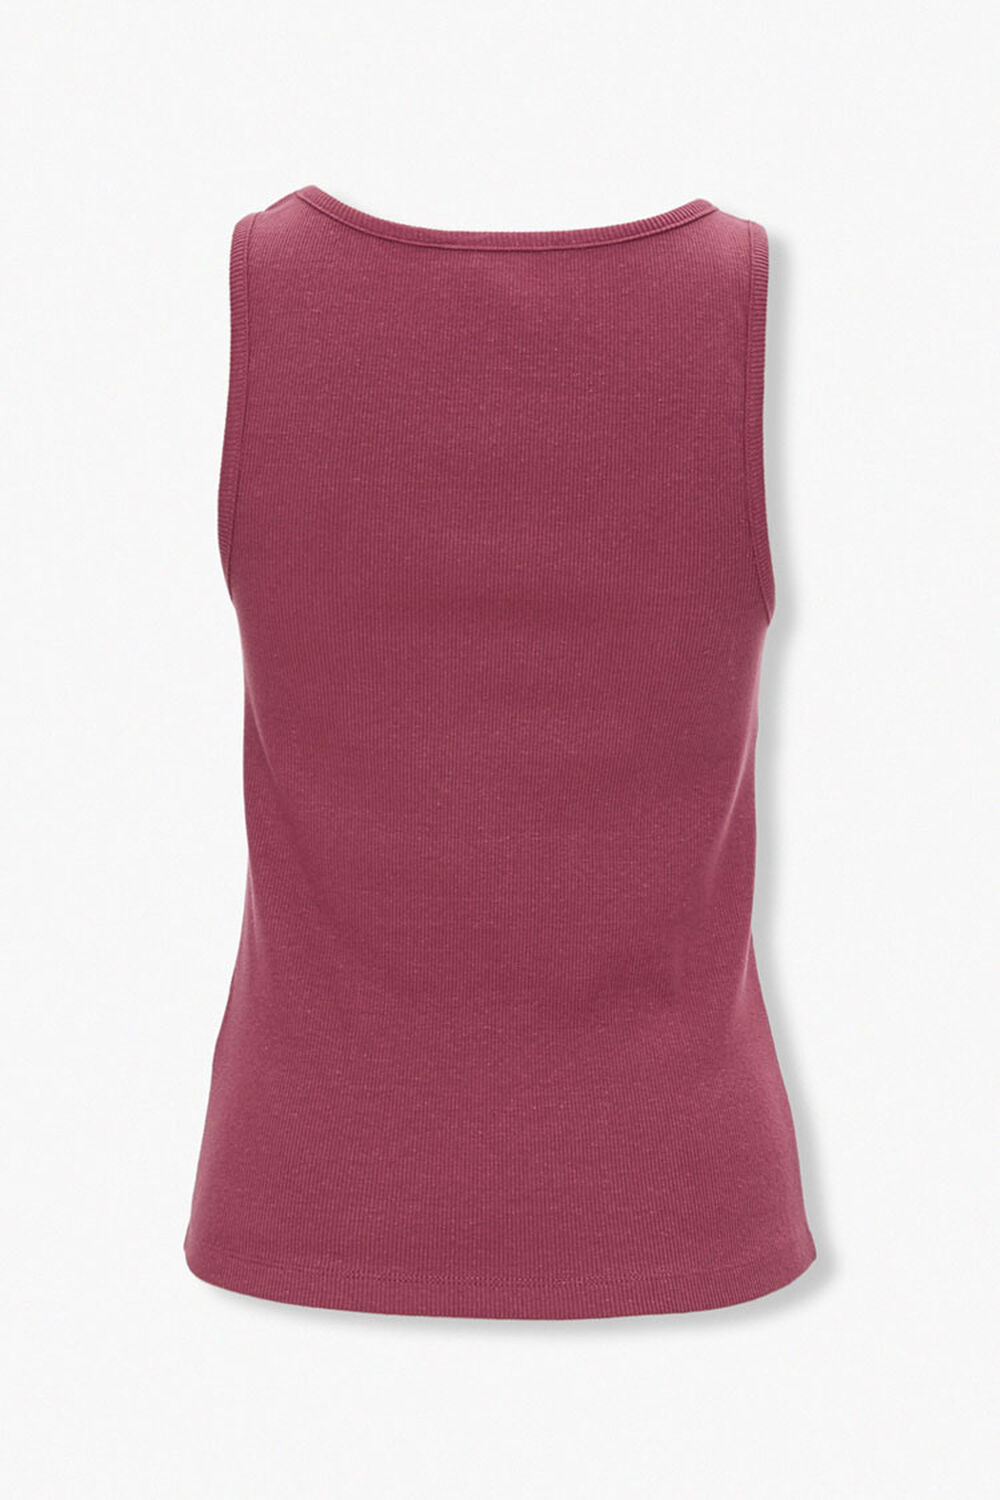 BERRY Ribbed Knit Tank Top, image 3